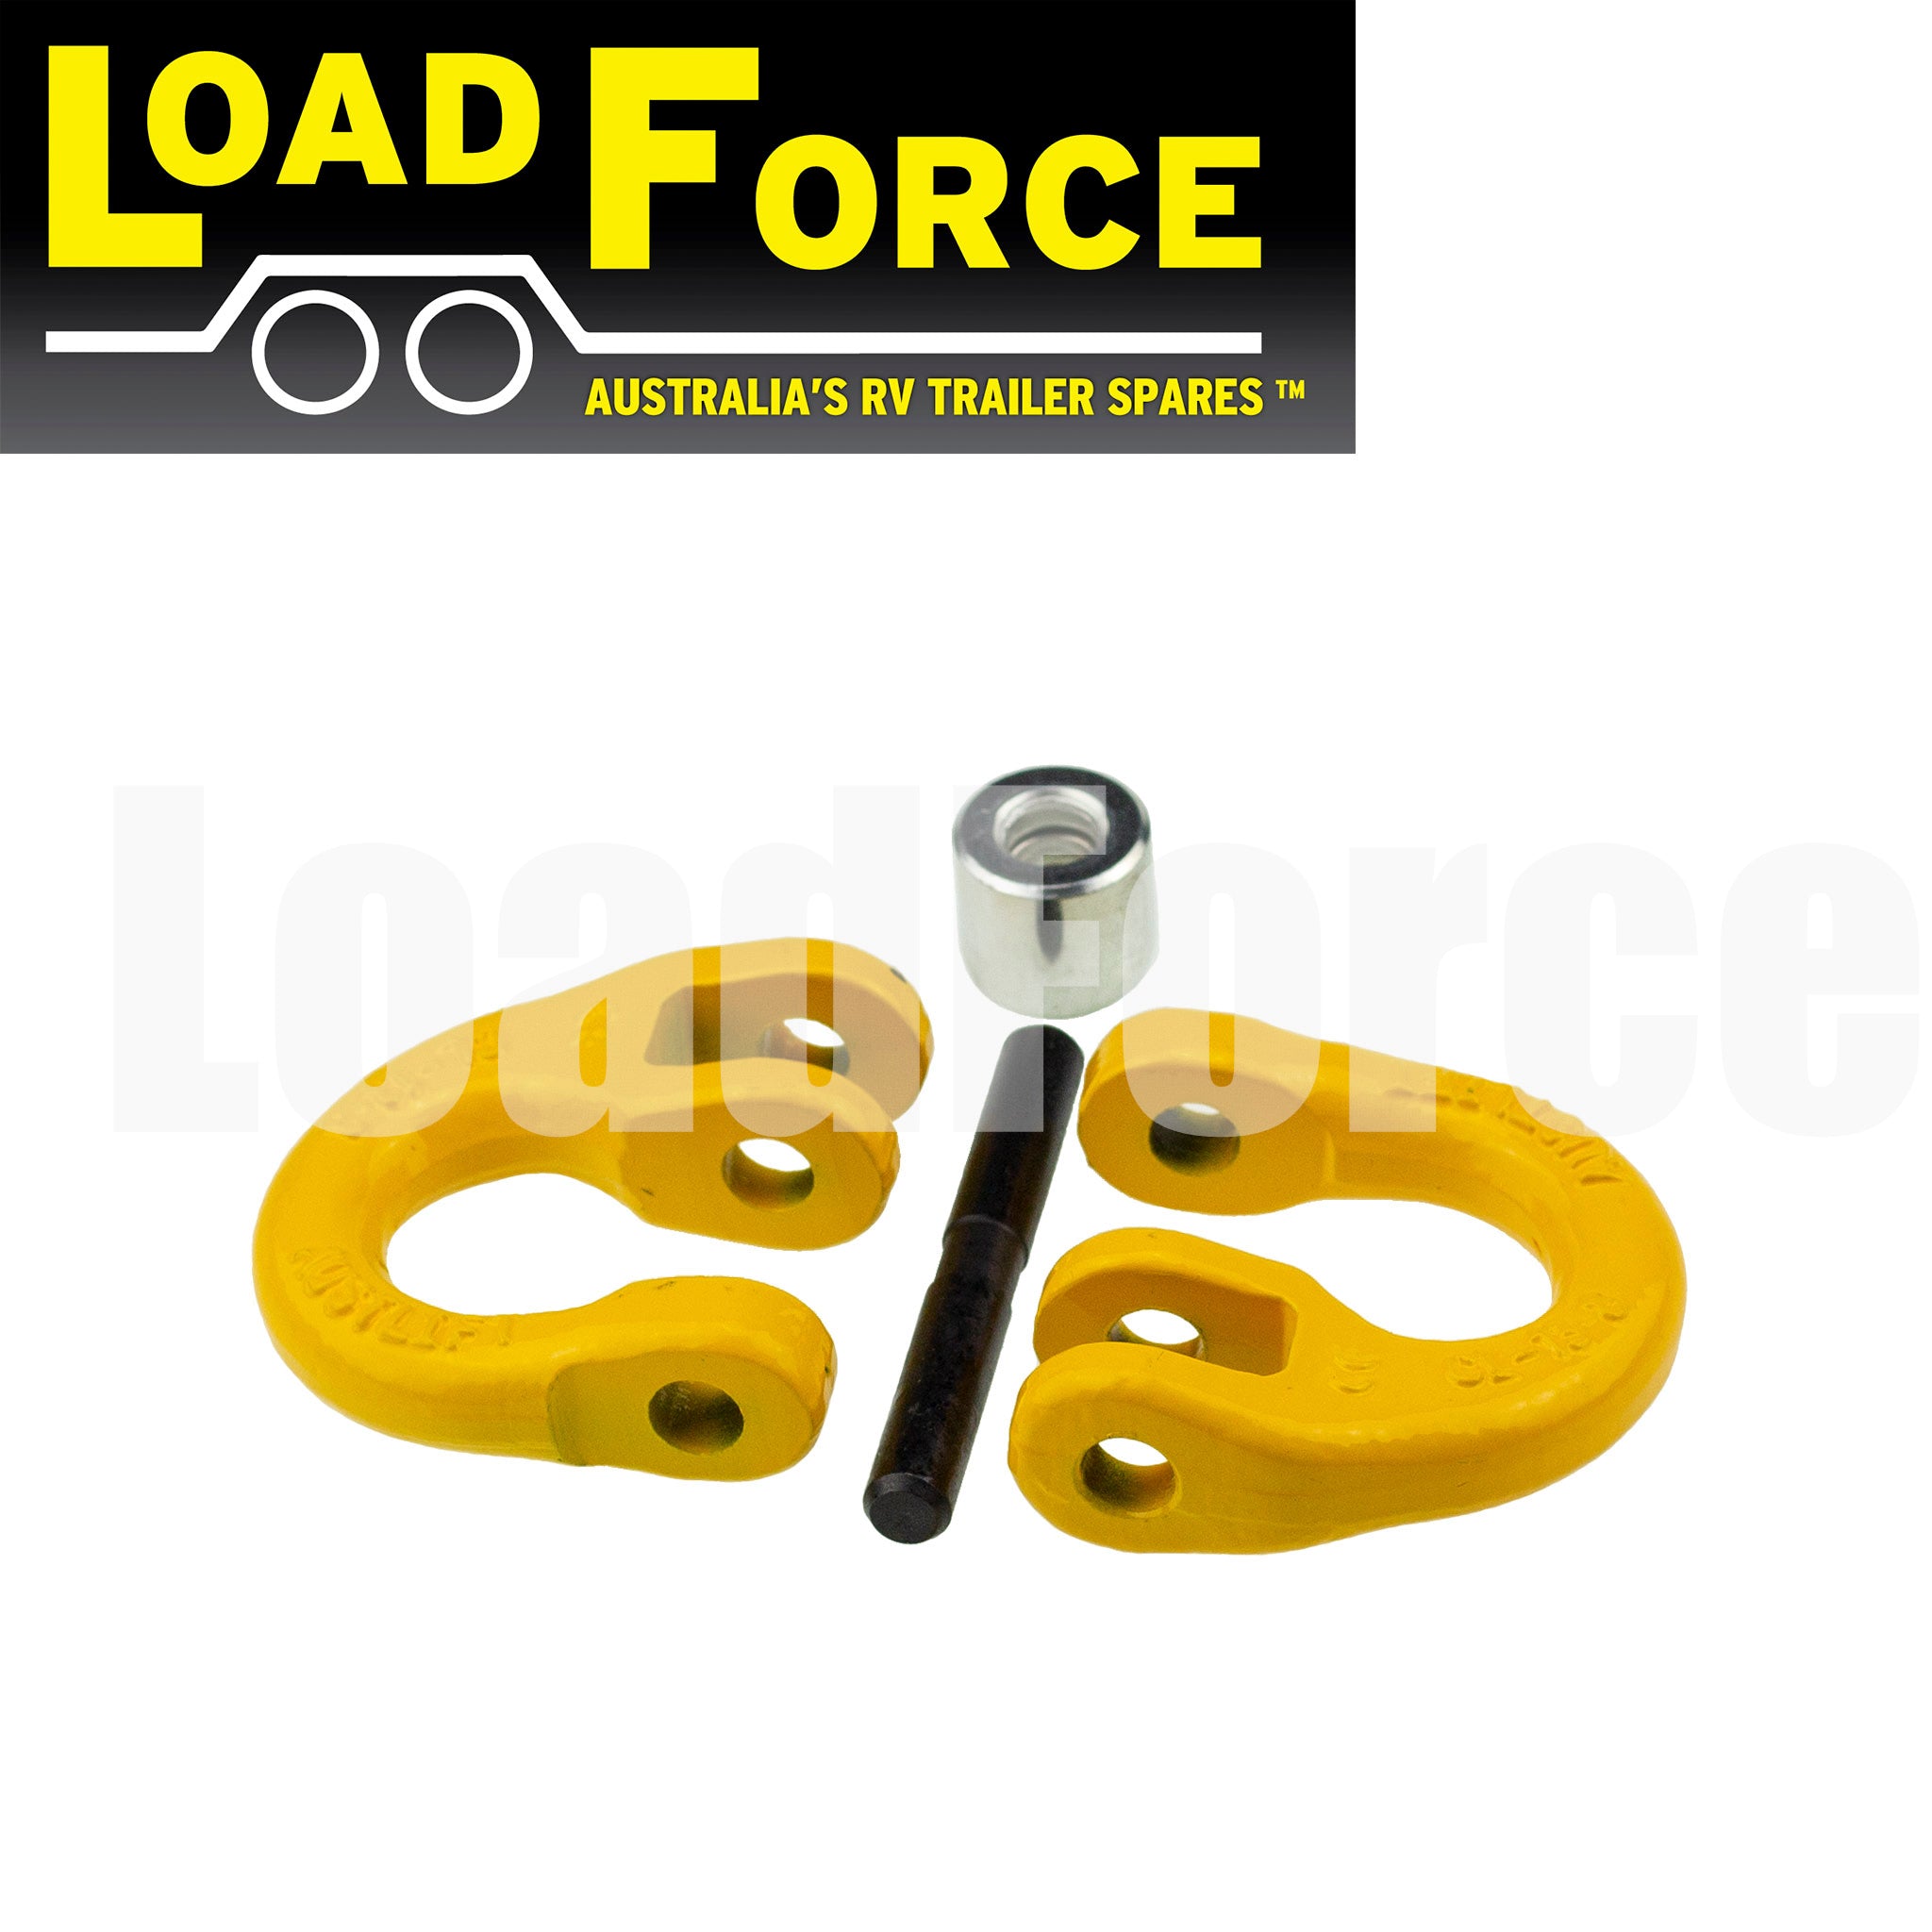 13mm trailer chain connector rated to 5300kg